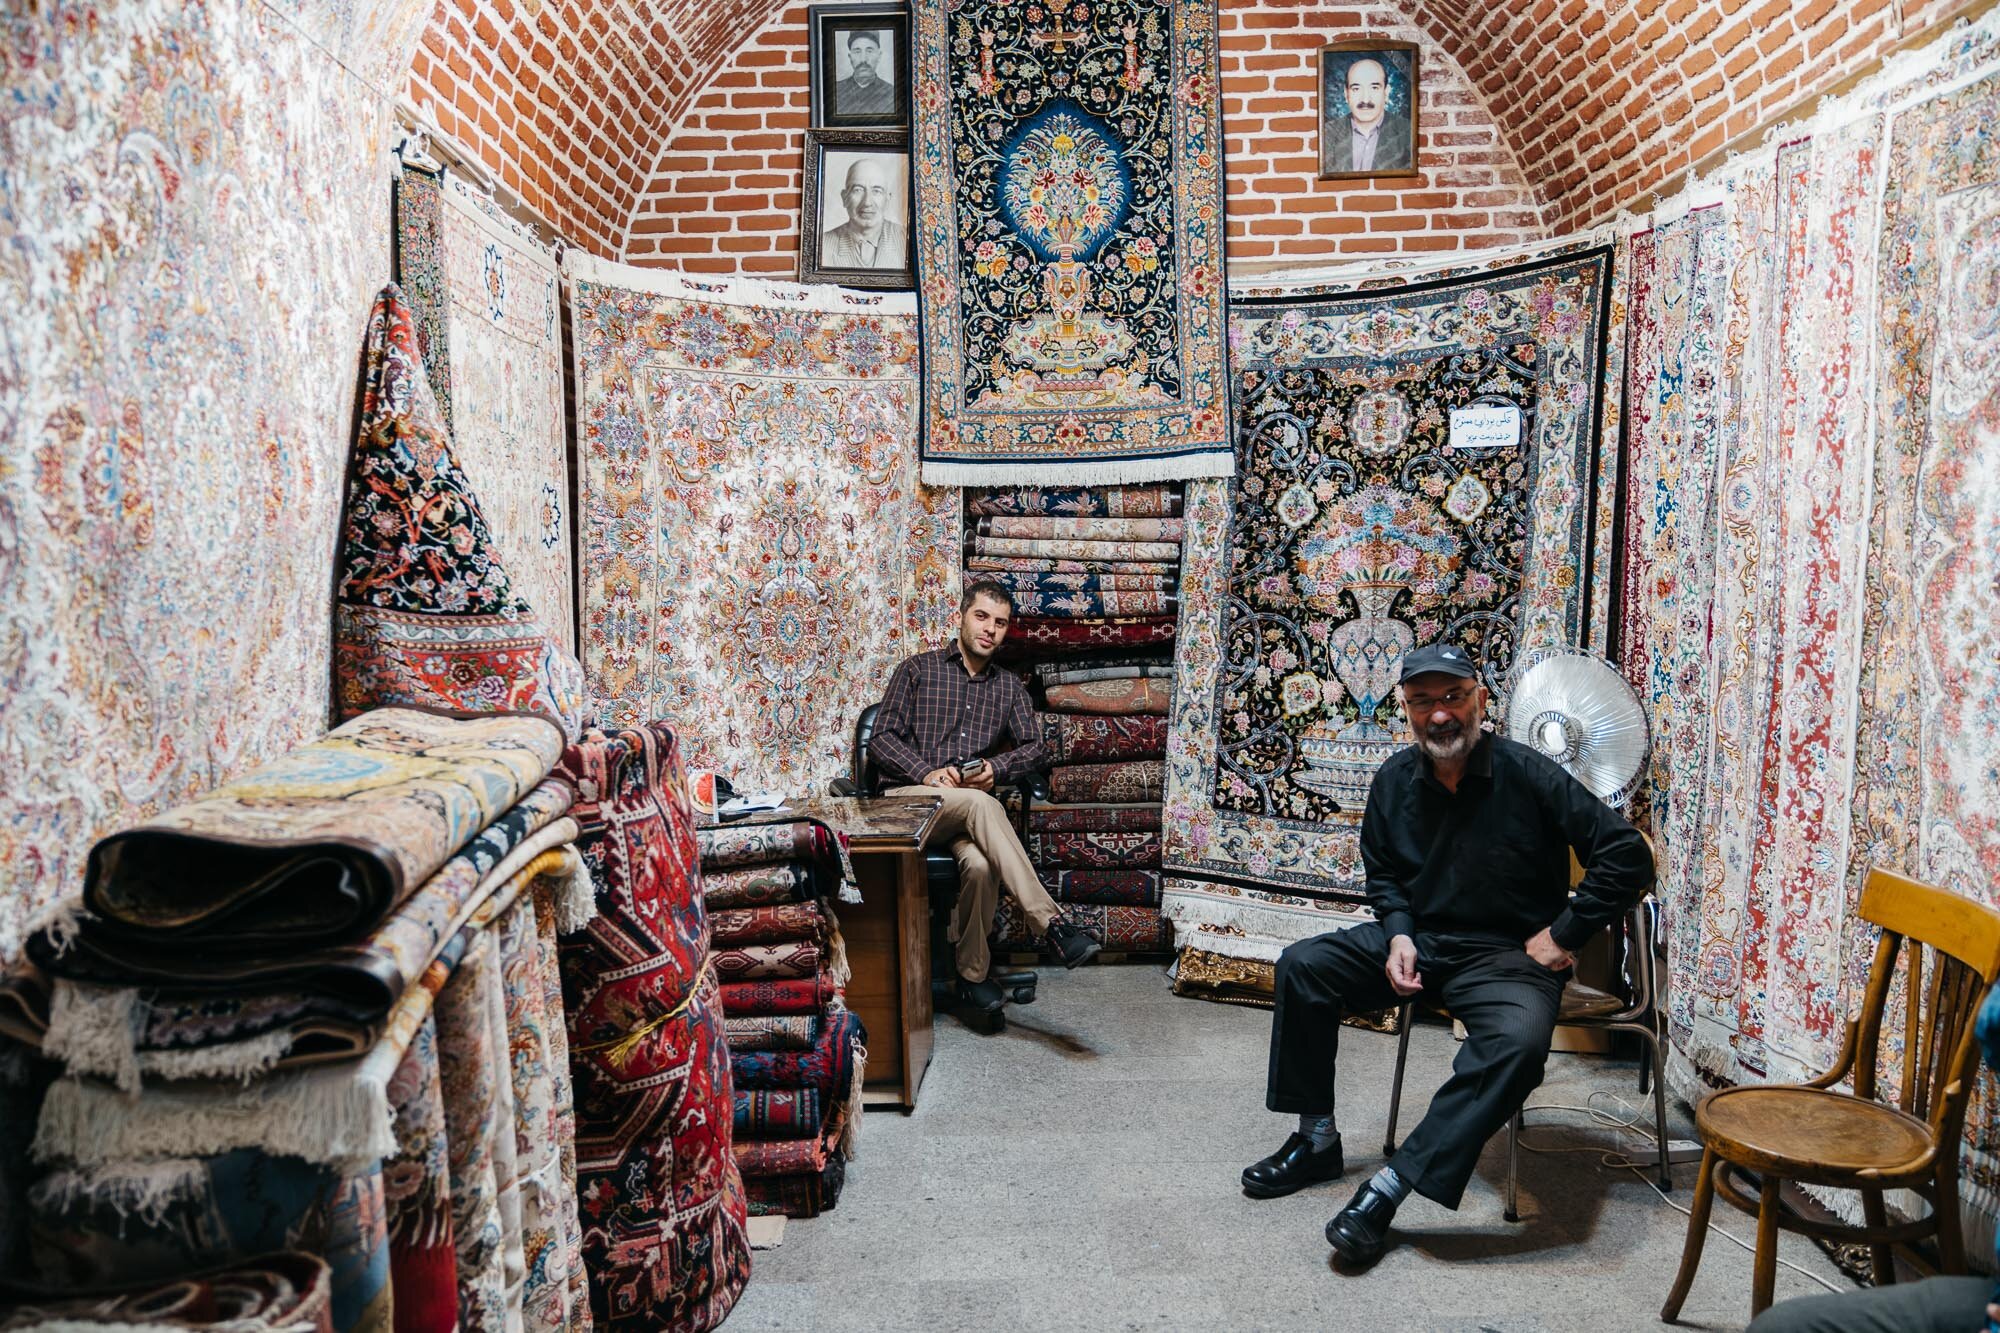  Carpet sellers. Hanging on the back wall are photographs of previous generations of those in the business. 